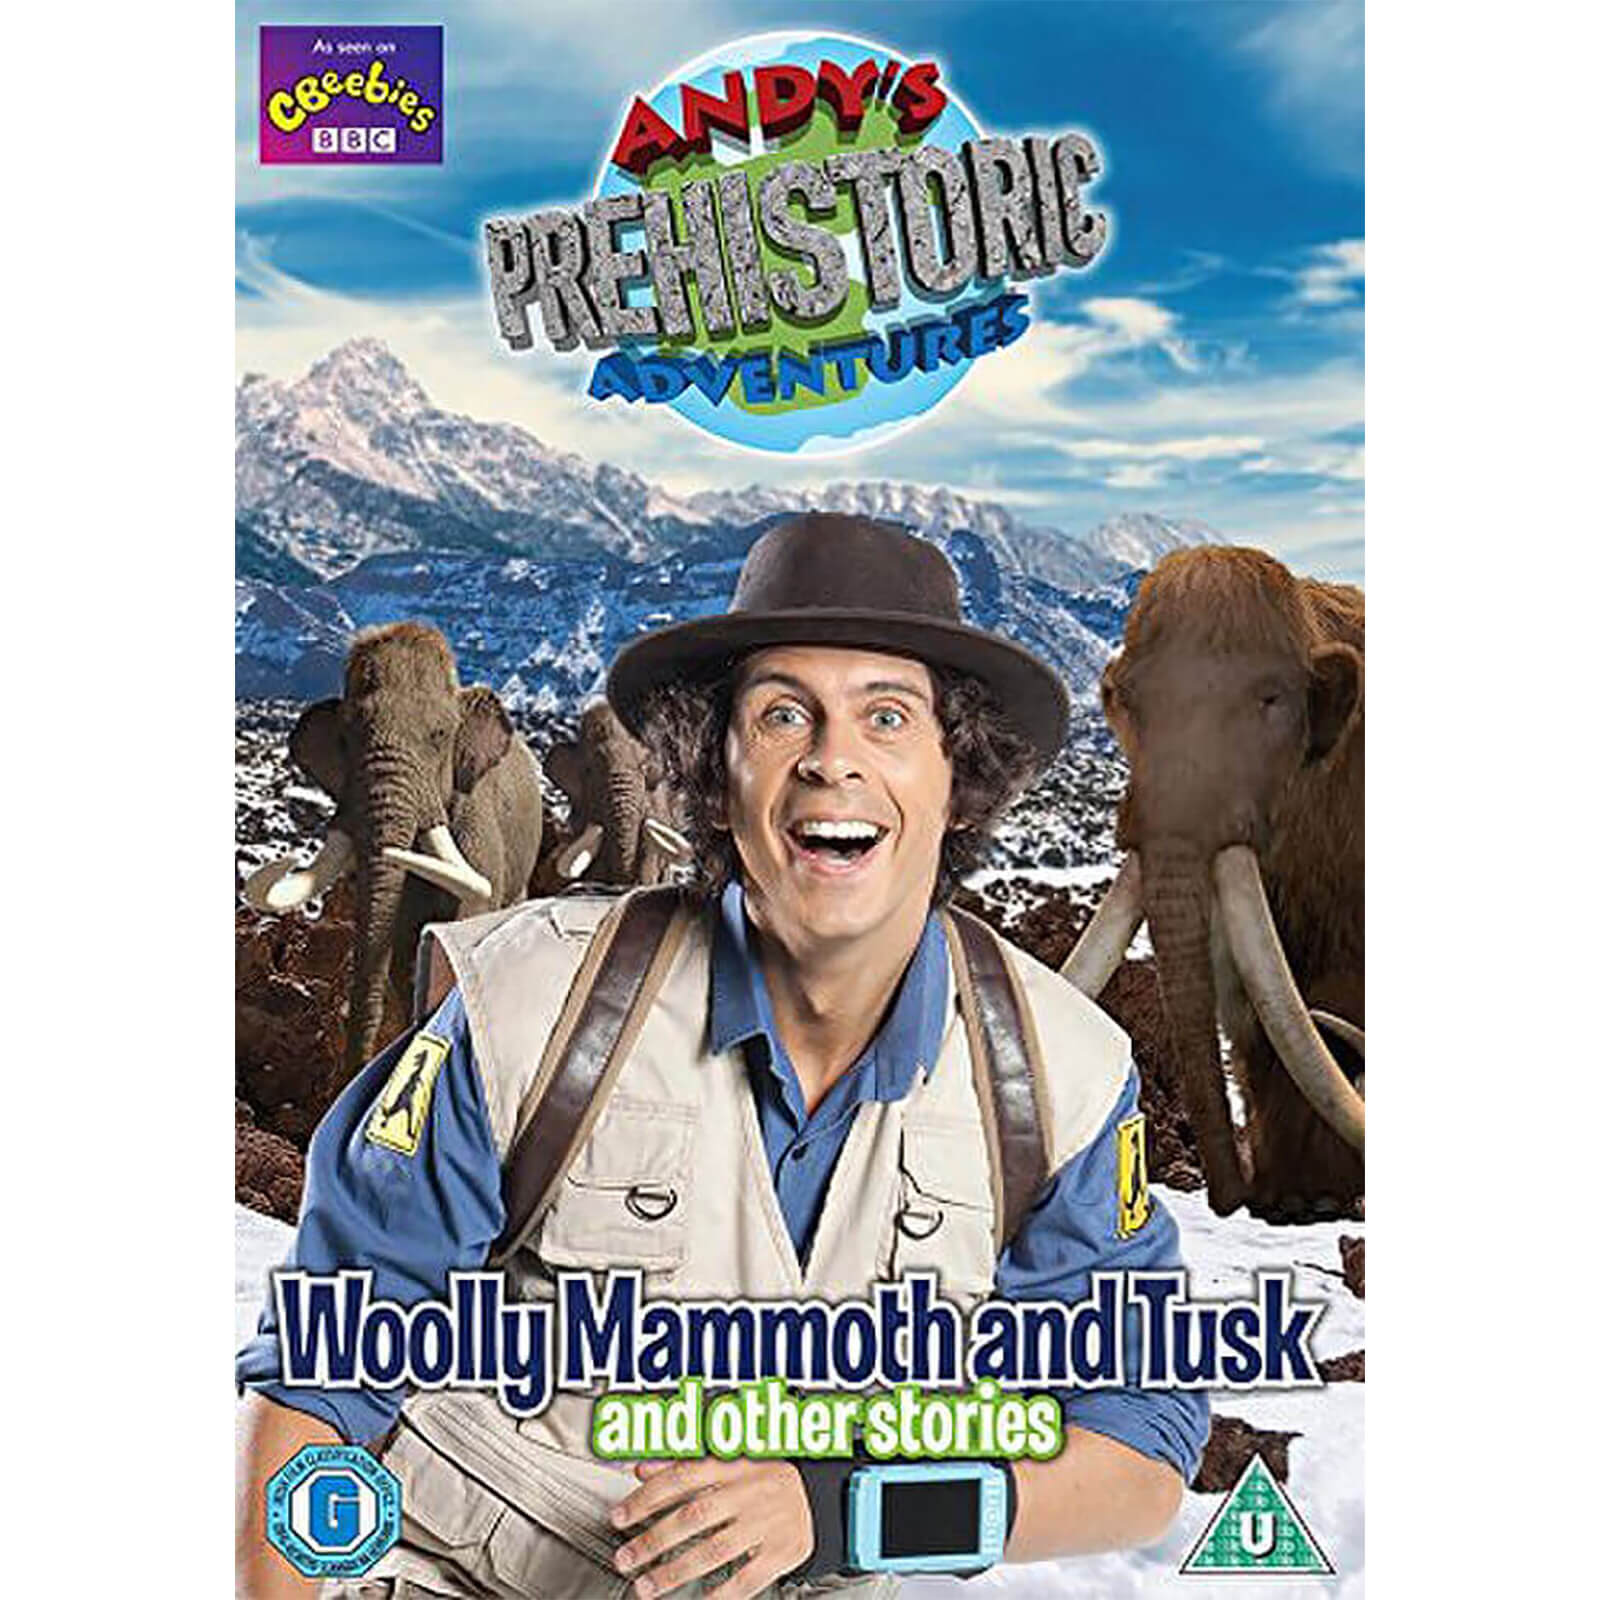 Andy's Prehistoric Adventures - Woolly Mammoth and Tusk von Dazzler